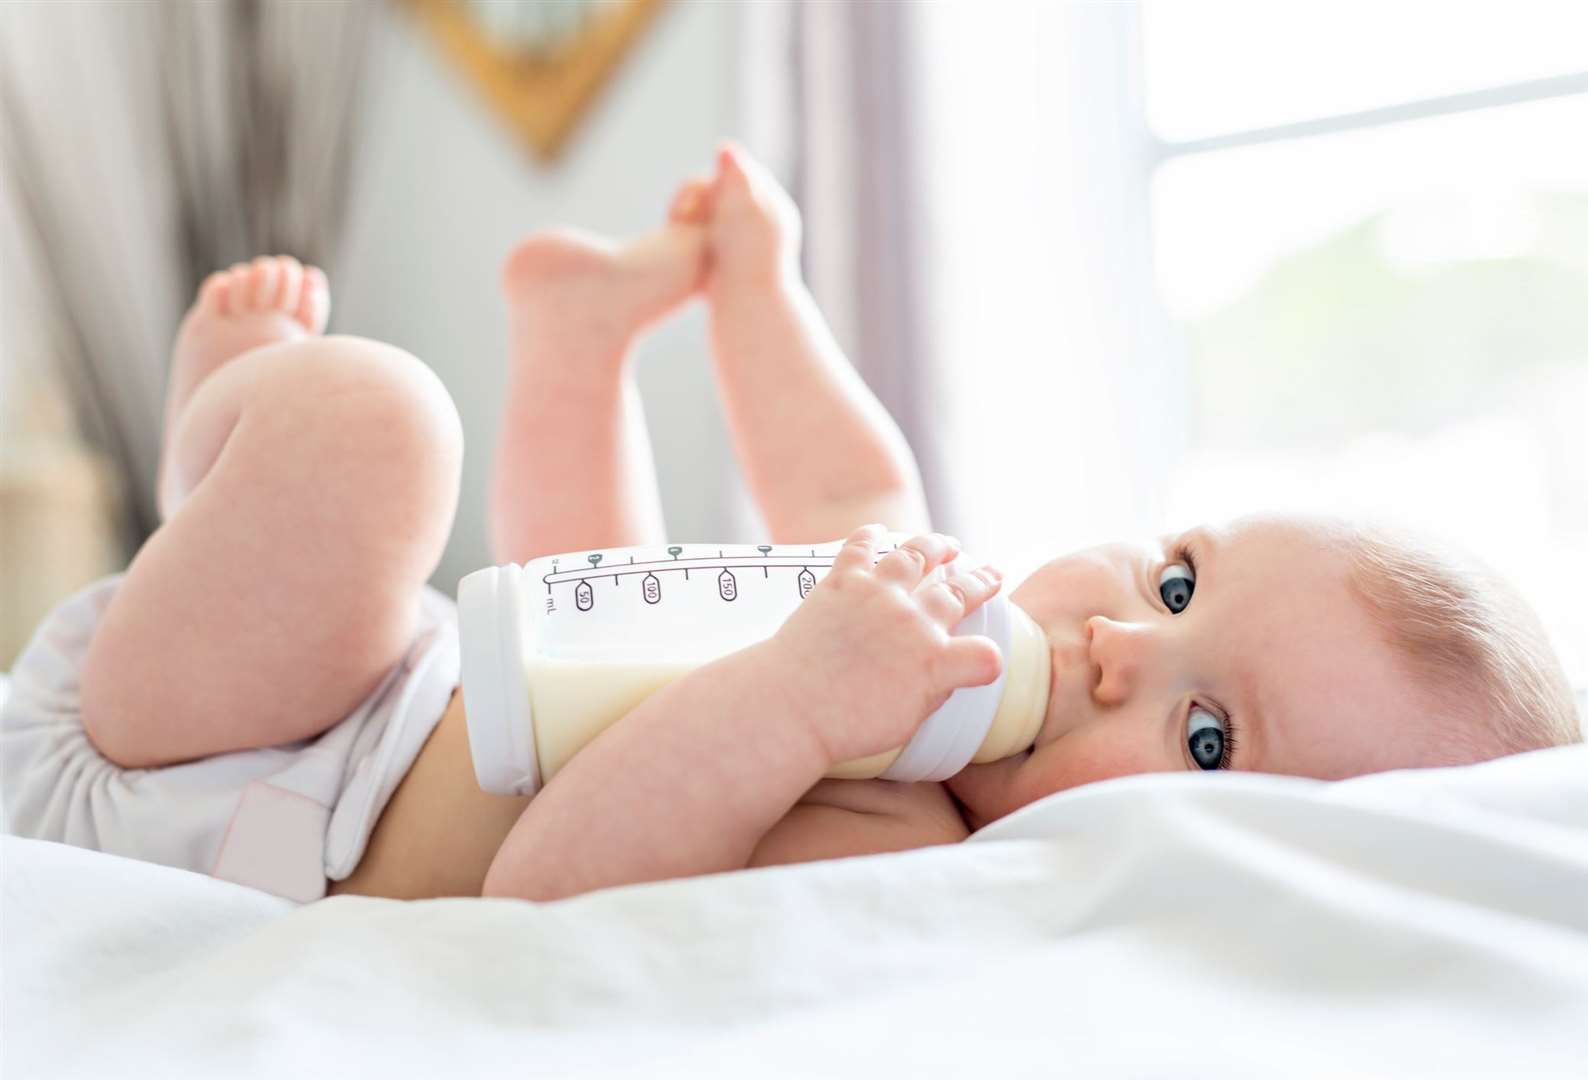 The price of infant formula has risen 24% in two years